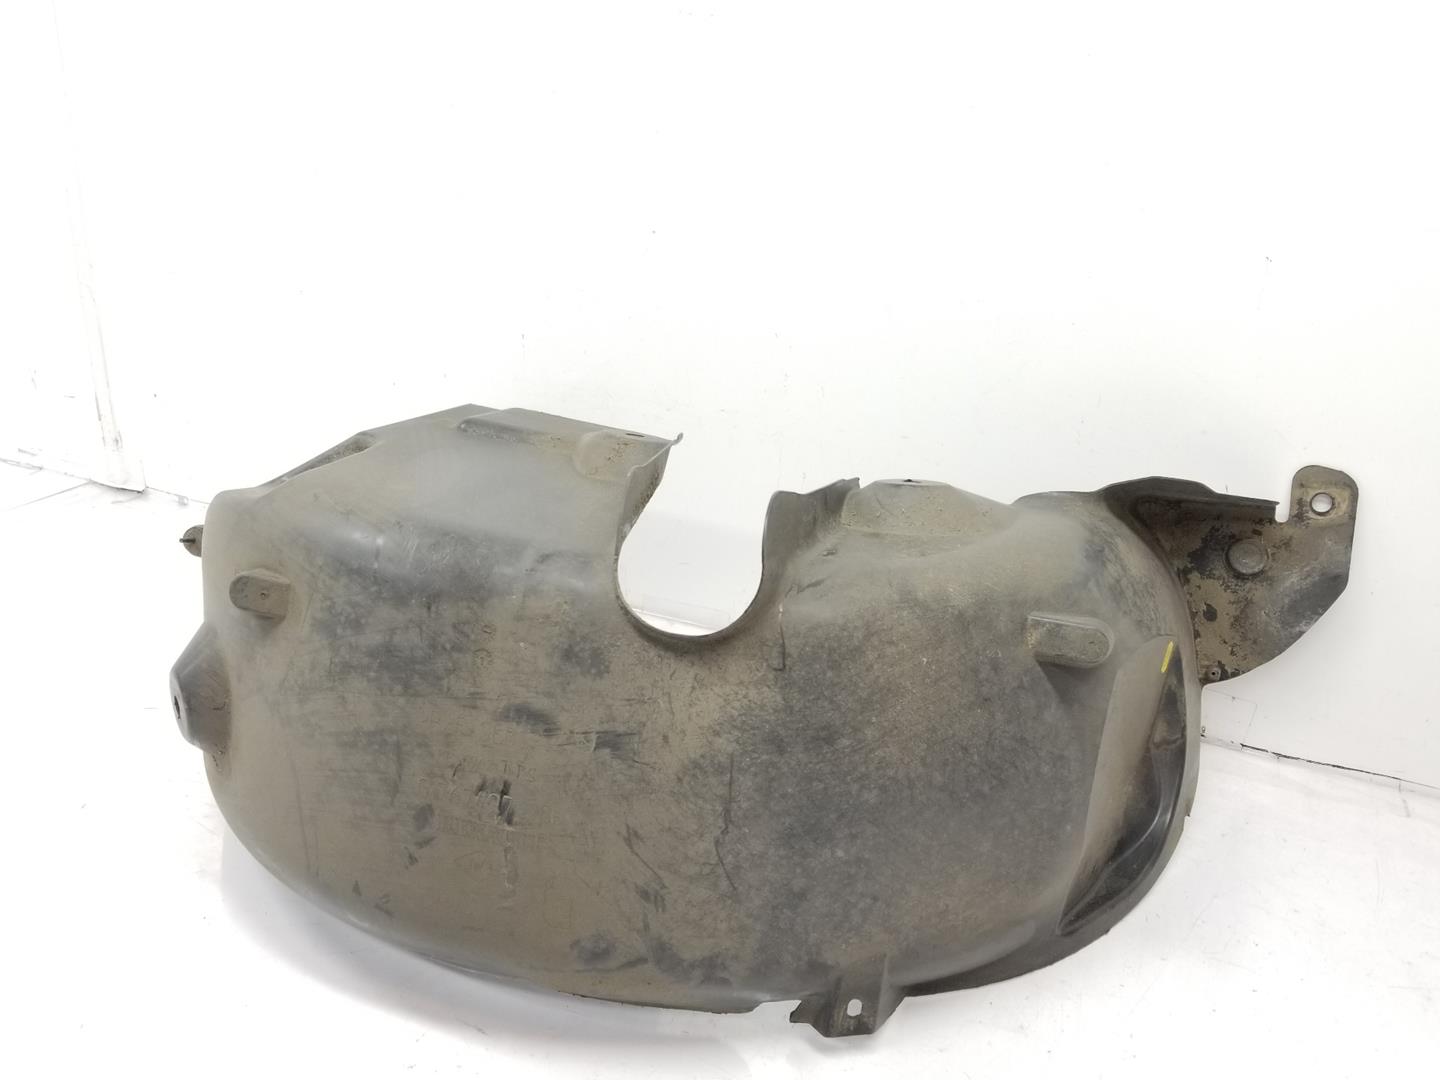 RENAULT Clio 3 generation (2005-2012) Other Body Parts 767497618R, 767497618R 22740470